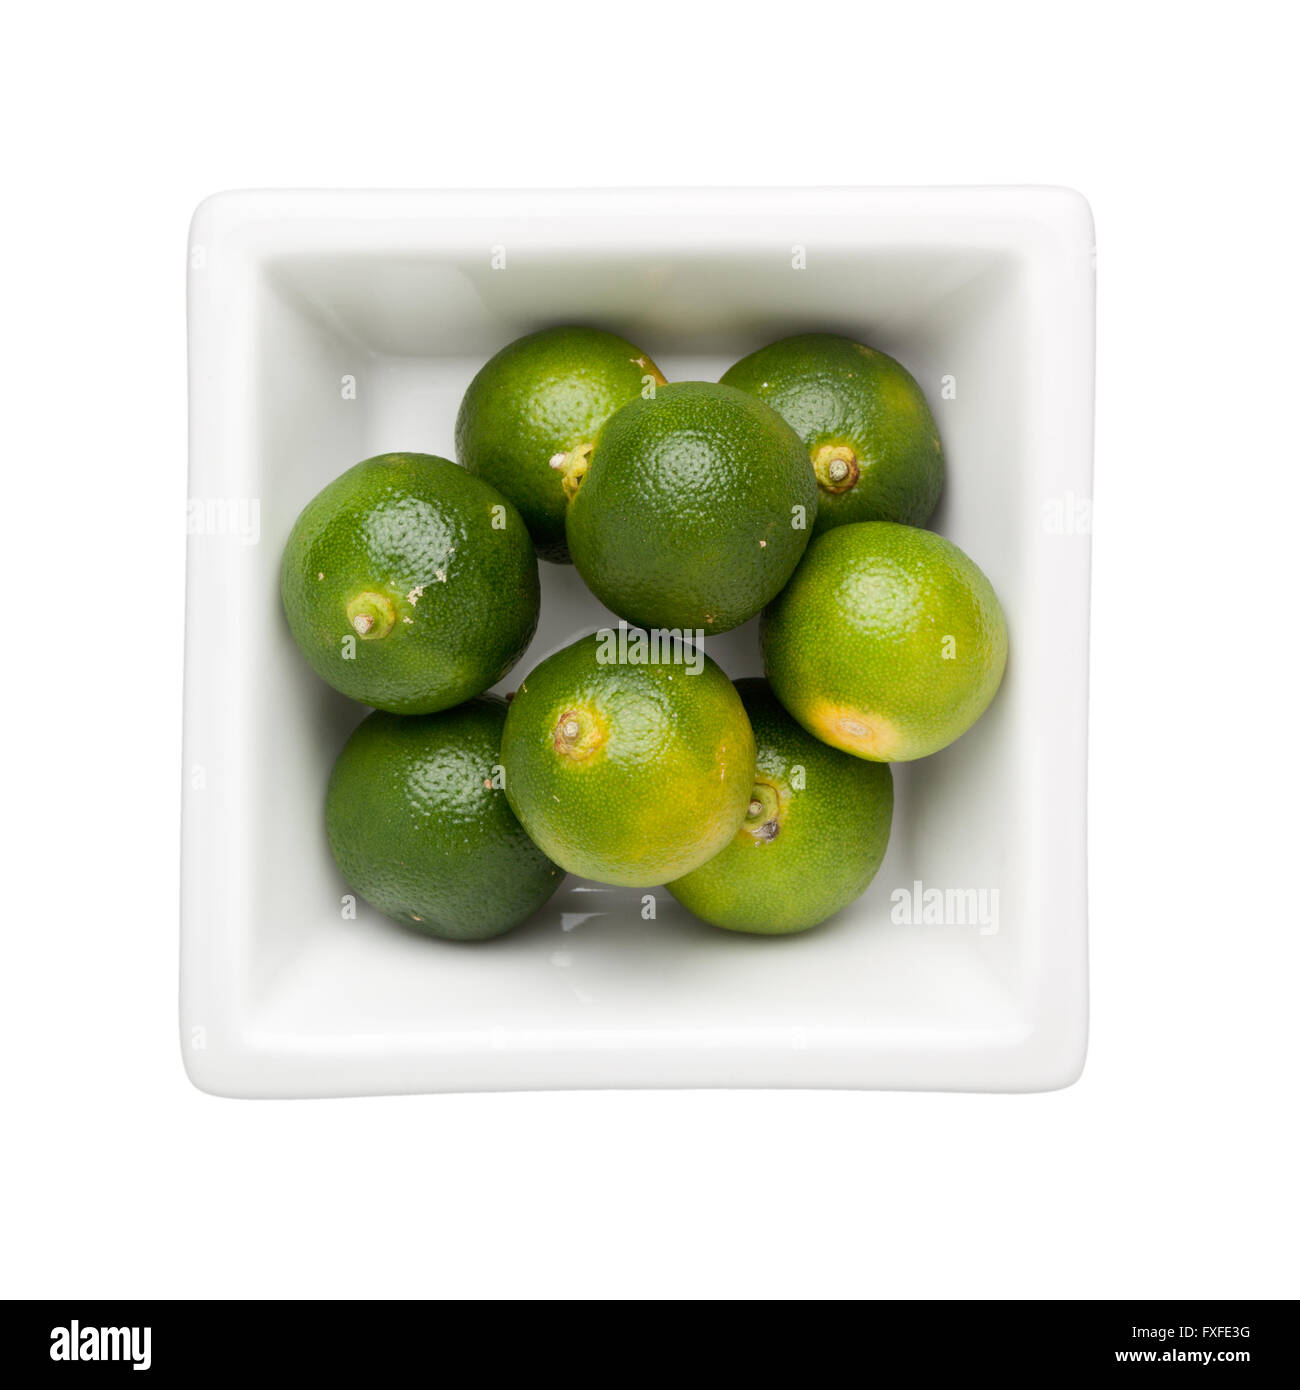 Calamondin fruits in a square bowl isolated on white background Stock Photo